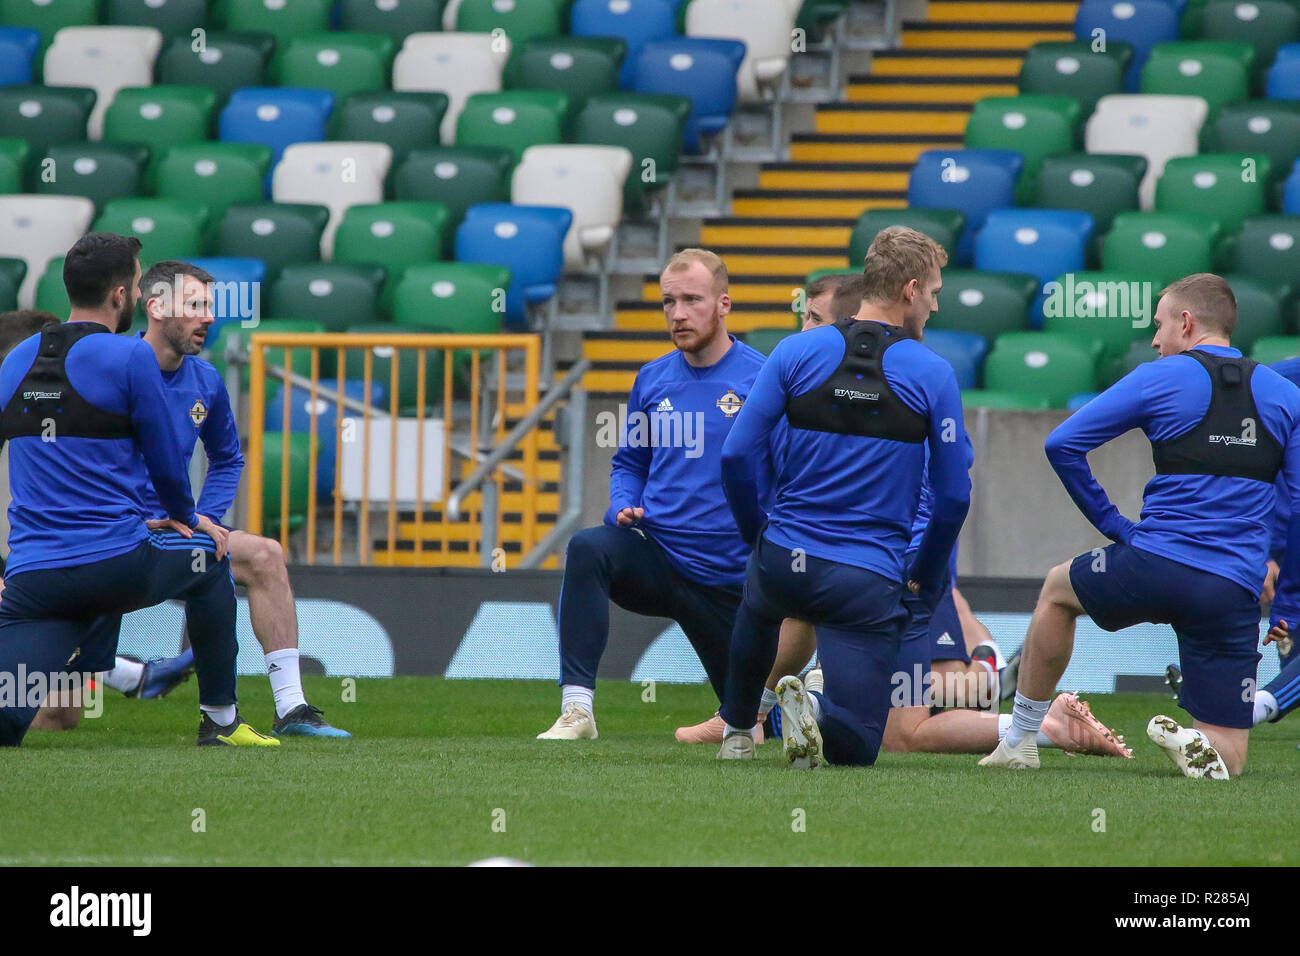 Windsor Park, Belfast, Northern Ireland.17 November 2018. Northern Ireland training in Belfast this morning ahead of their UEFA Nations League game against Austria tomorrow night in the stadium. A bruised Liam Boyce in training. Credit: David Hunter/Alamy Live News. Stock Photo